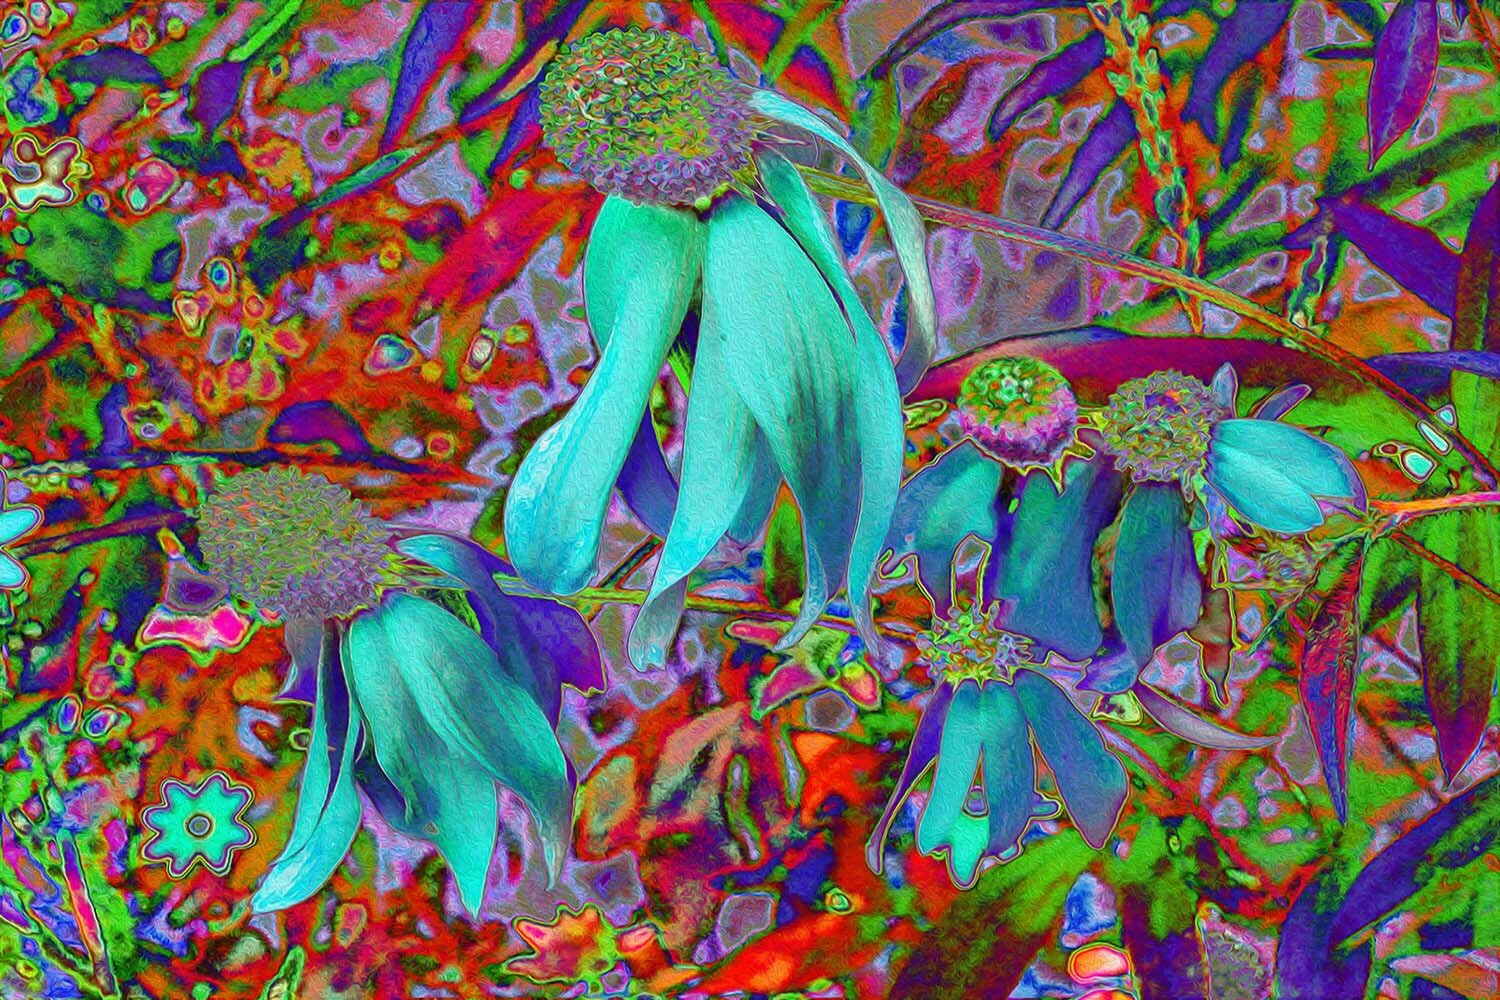 Psychedelic Blue Wildflowers in the Garden